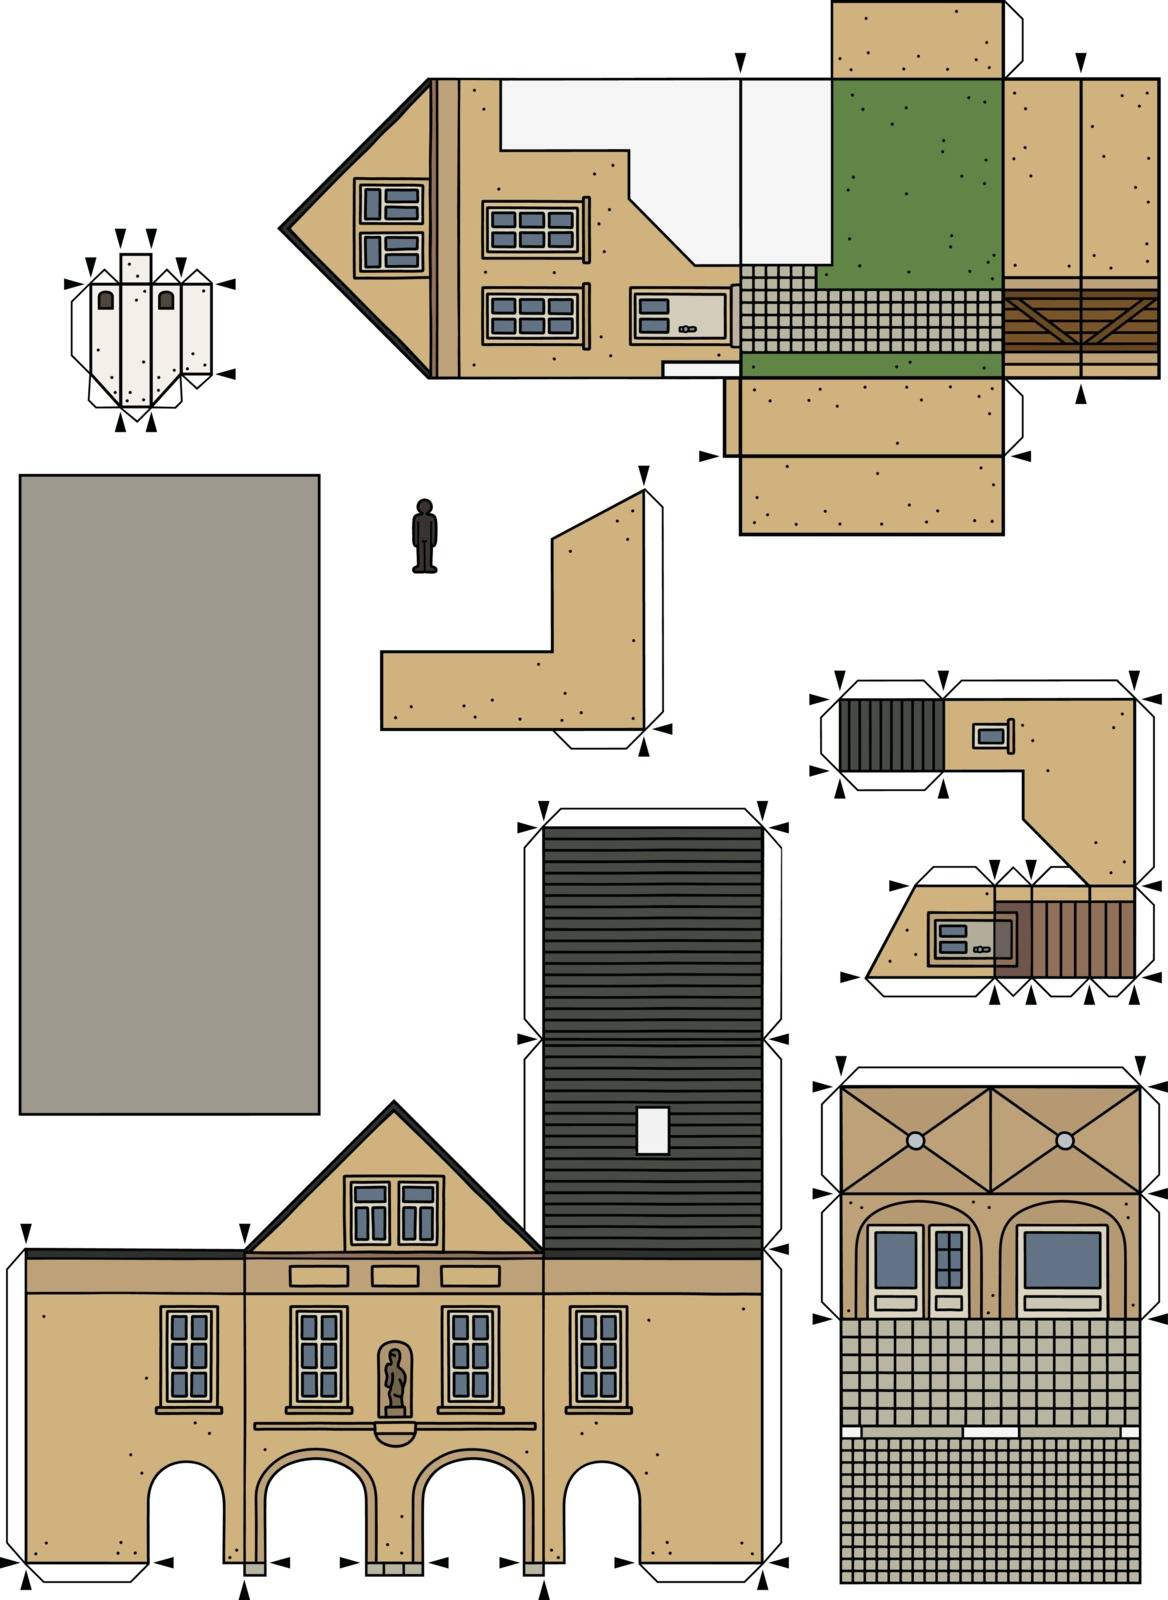 The vectorized hand drawing of an paper model of the old beige town burger house